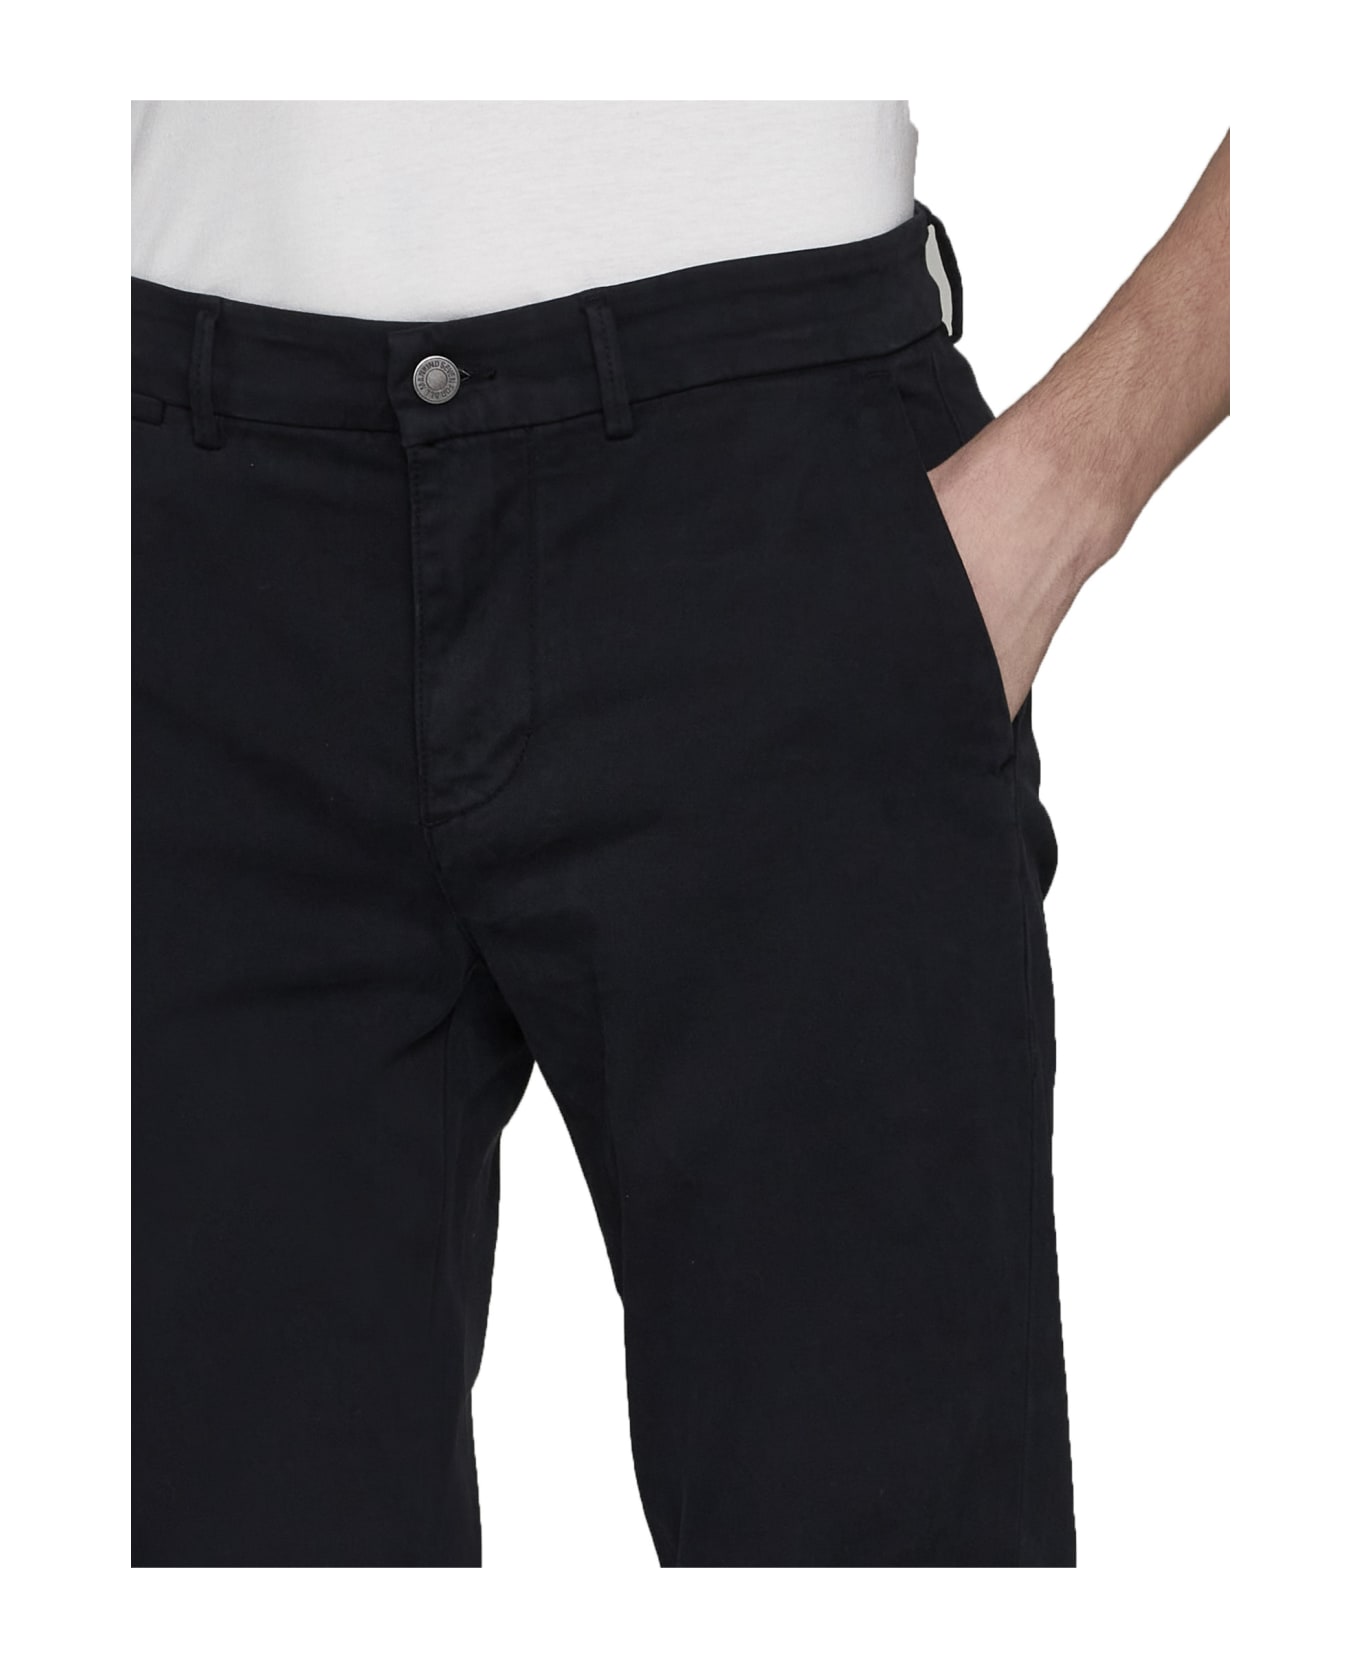 7 For All Mankind Pants - Black ボトムス